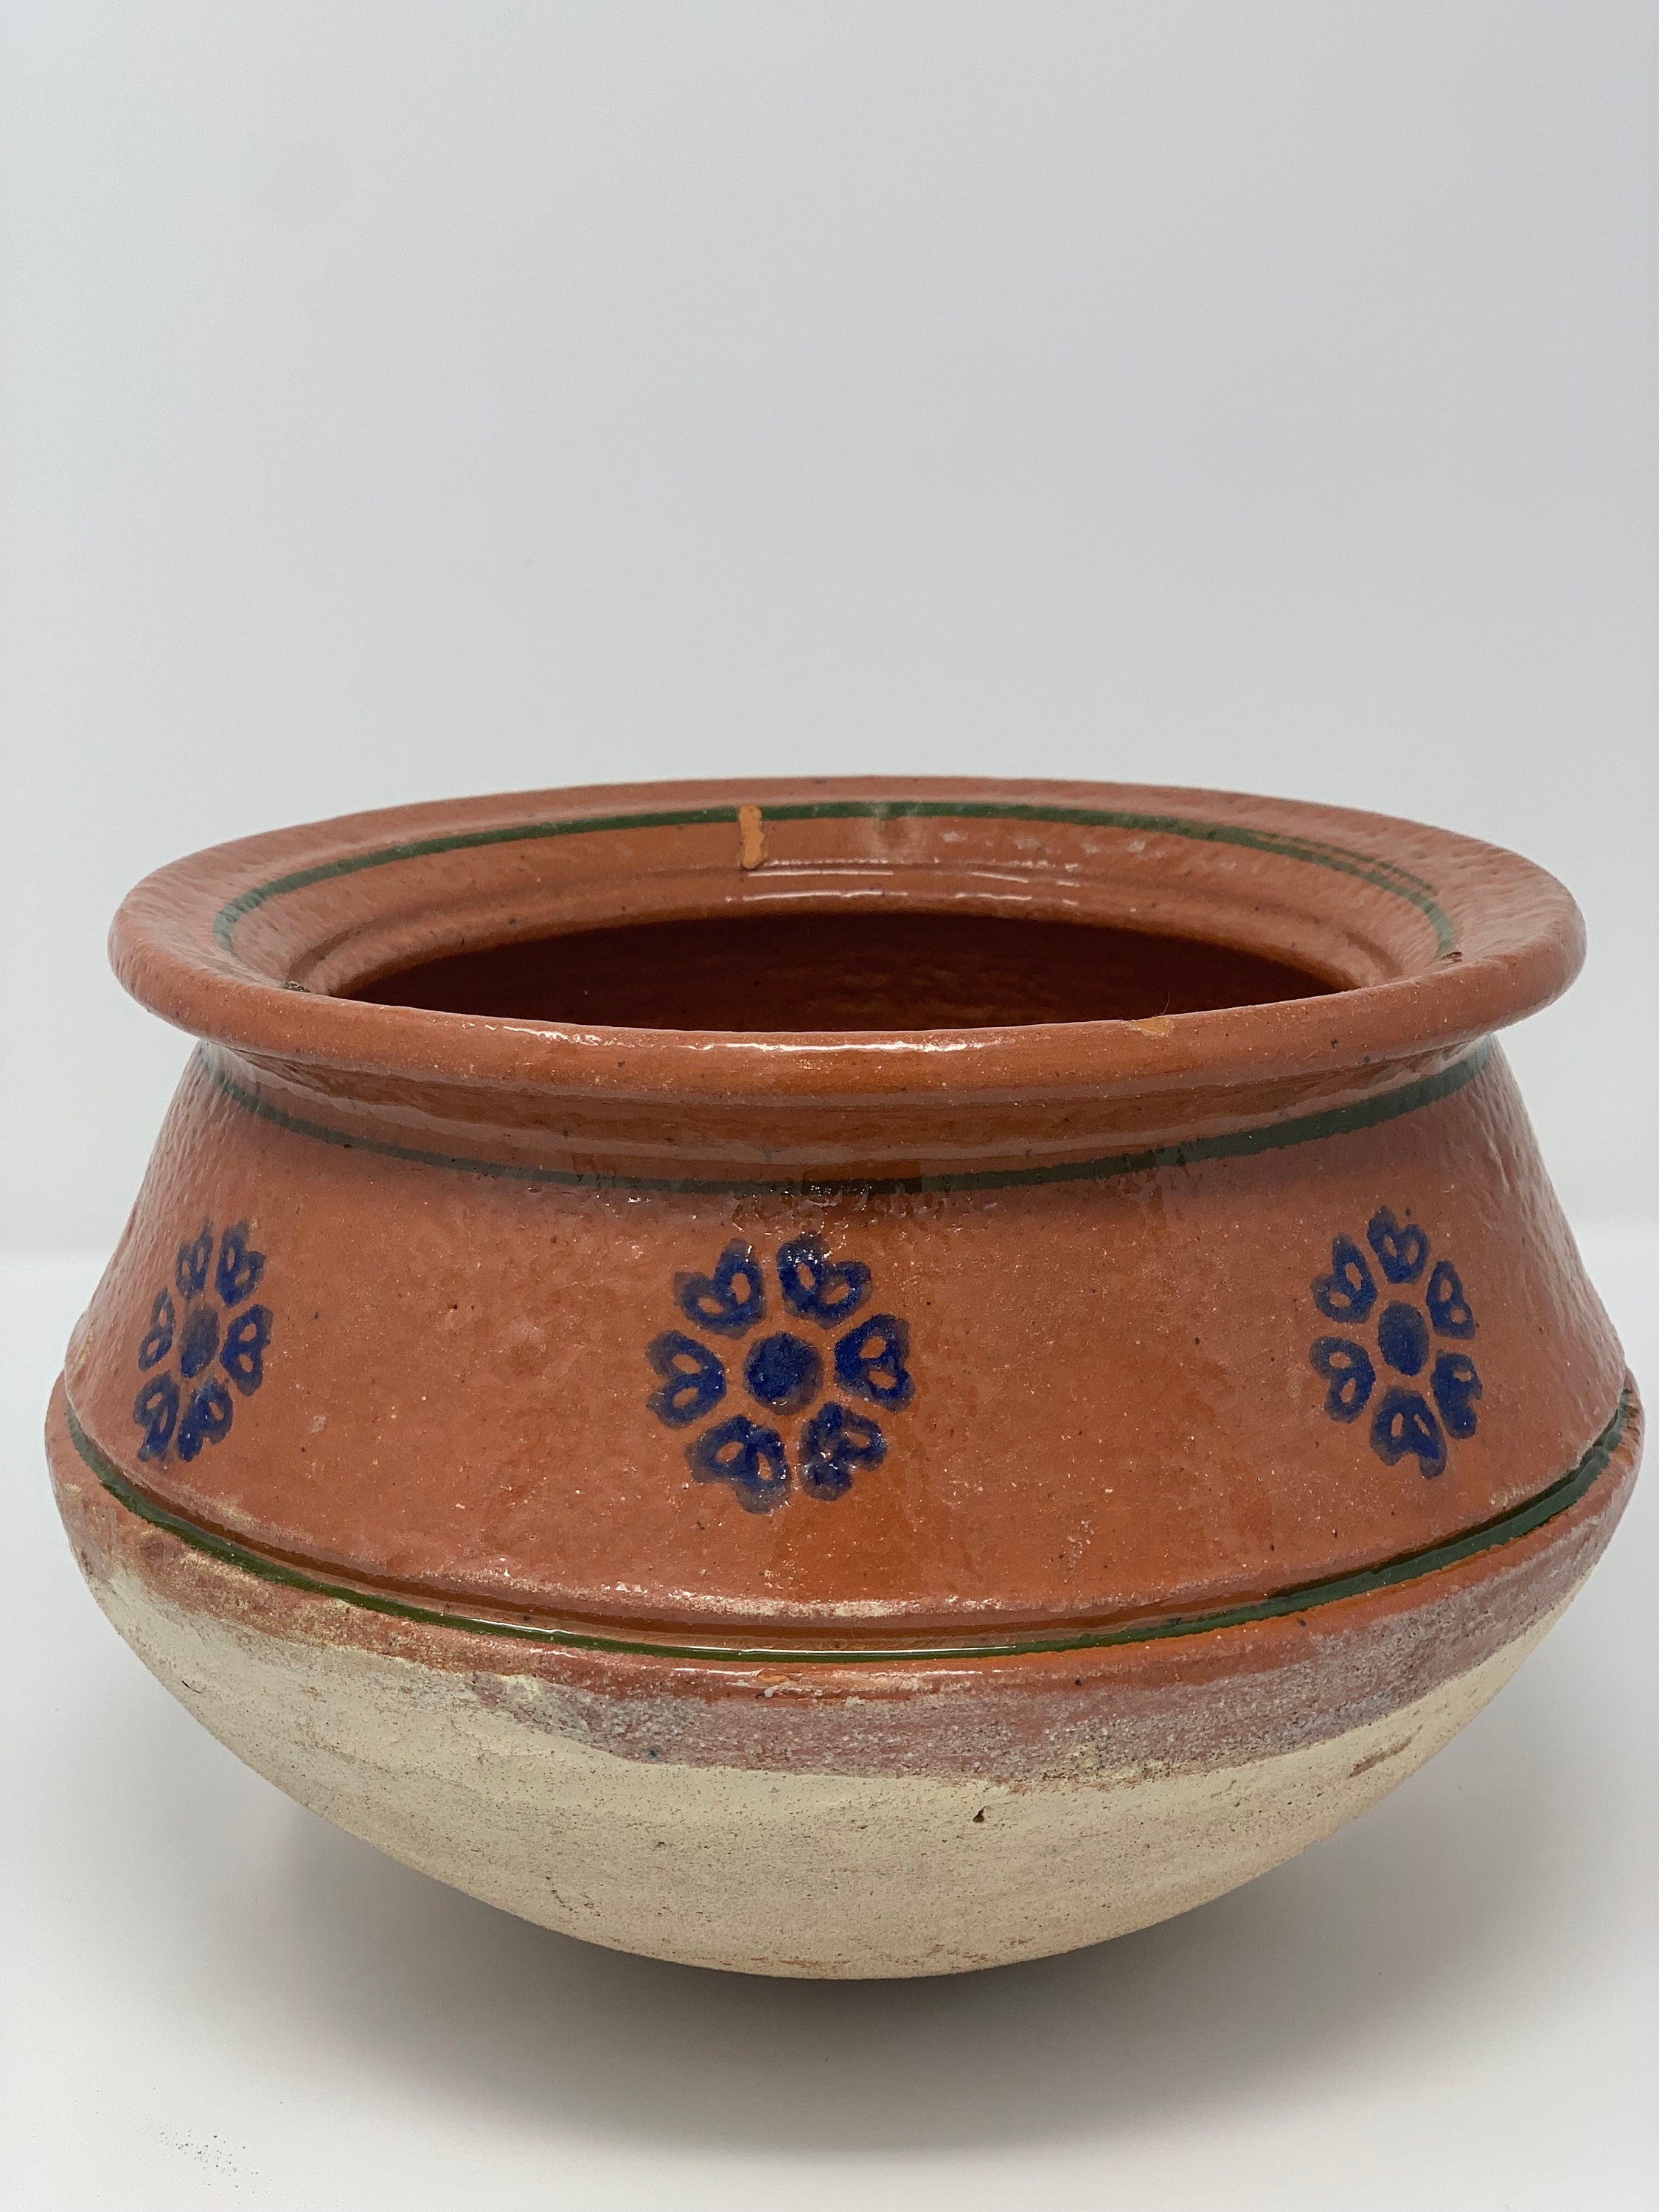 Large Spanish Colonial Clay Cooking Pot W/ Old Fire Patina, Early 20th C